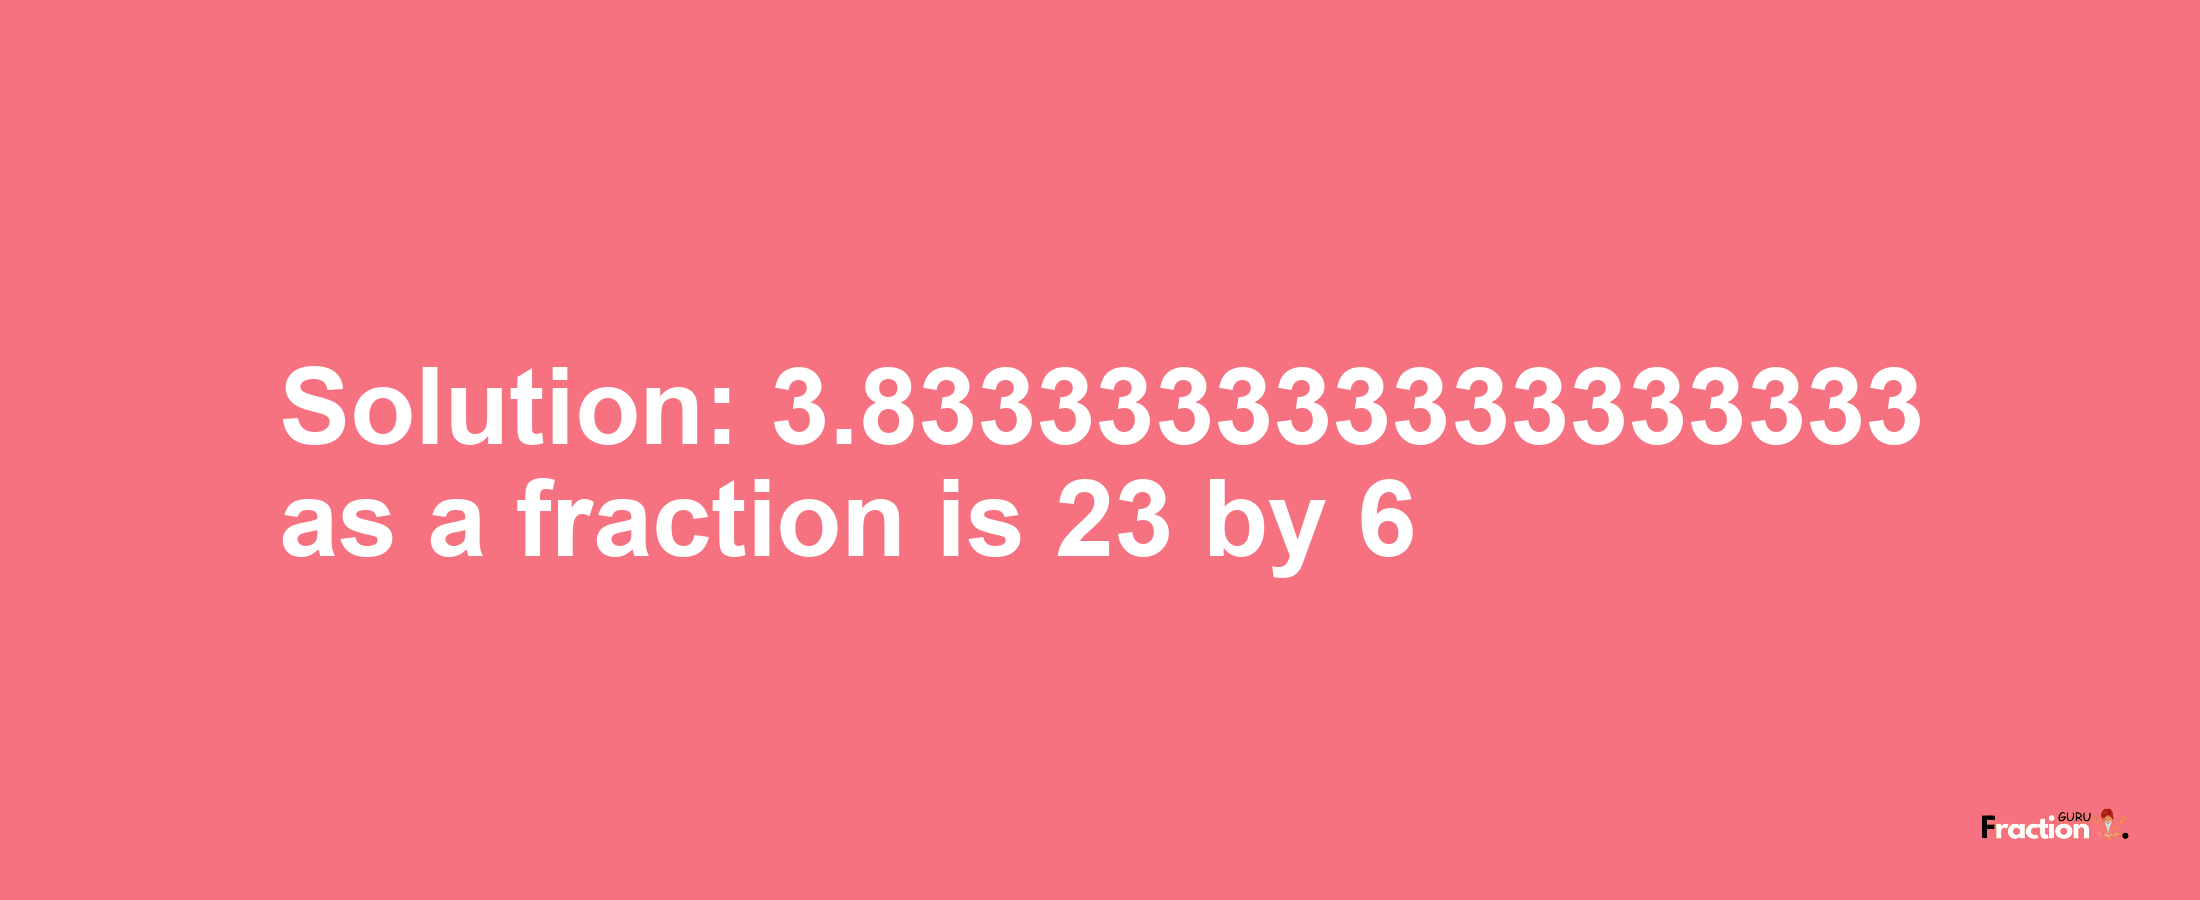 Solution:3.833333333333333333 as a fraction is 23/6